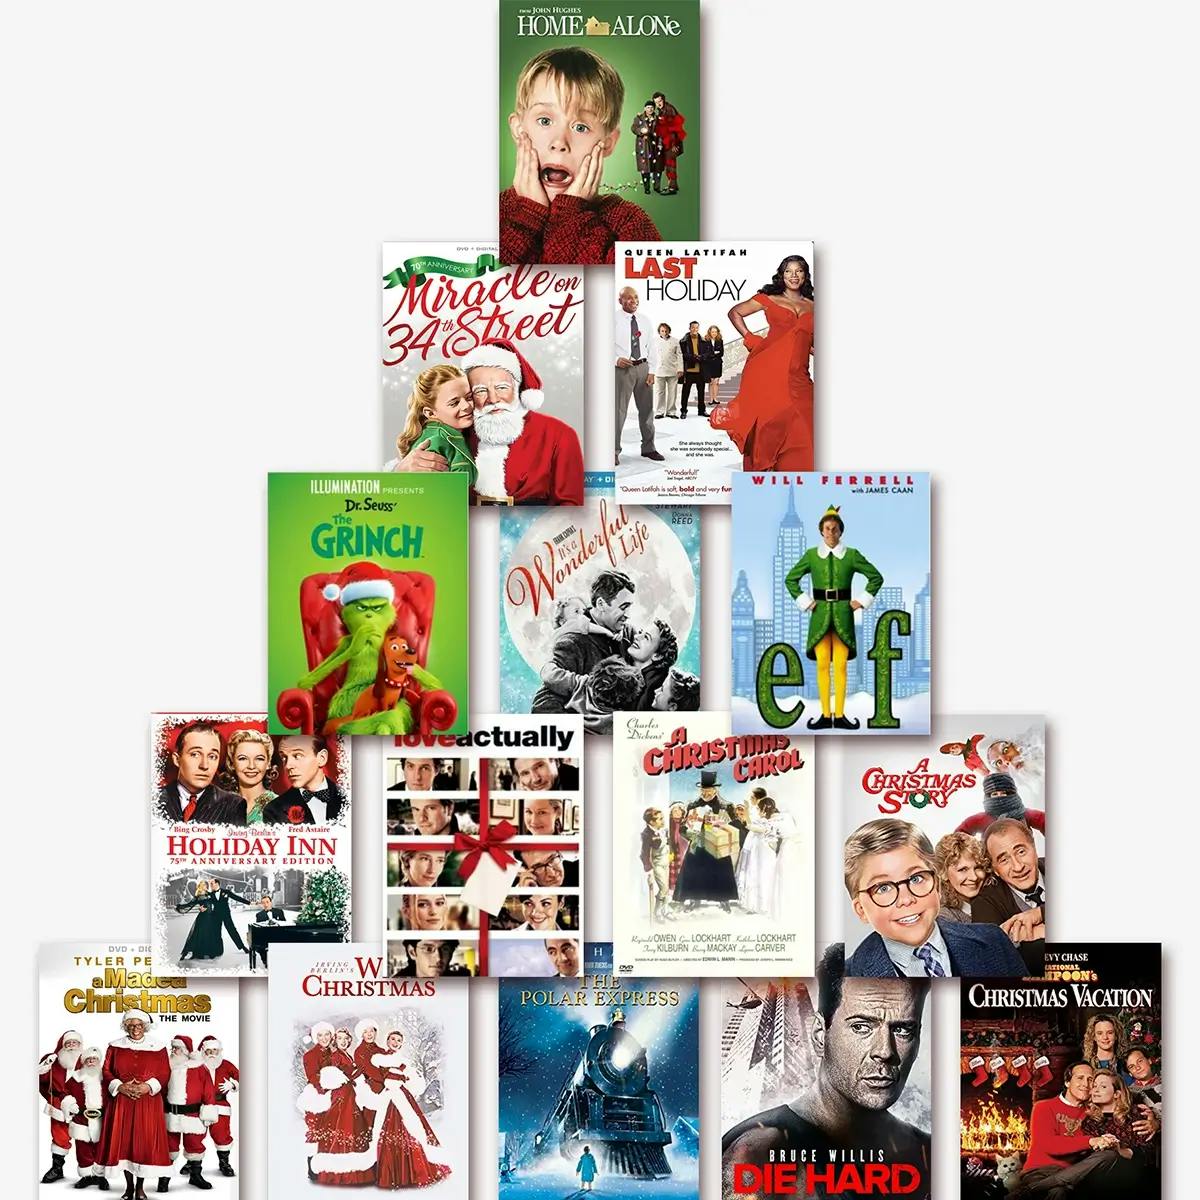 A stack of holiday-themed DVDs arranged in the shape of a Christmas tree.